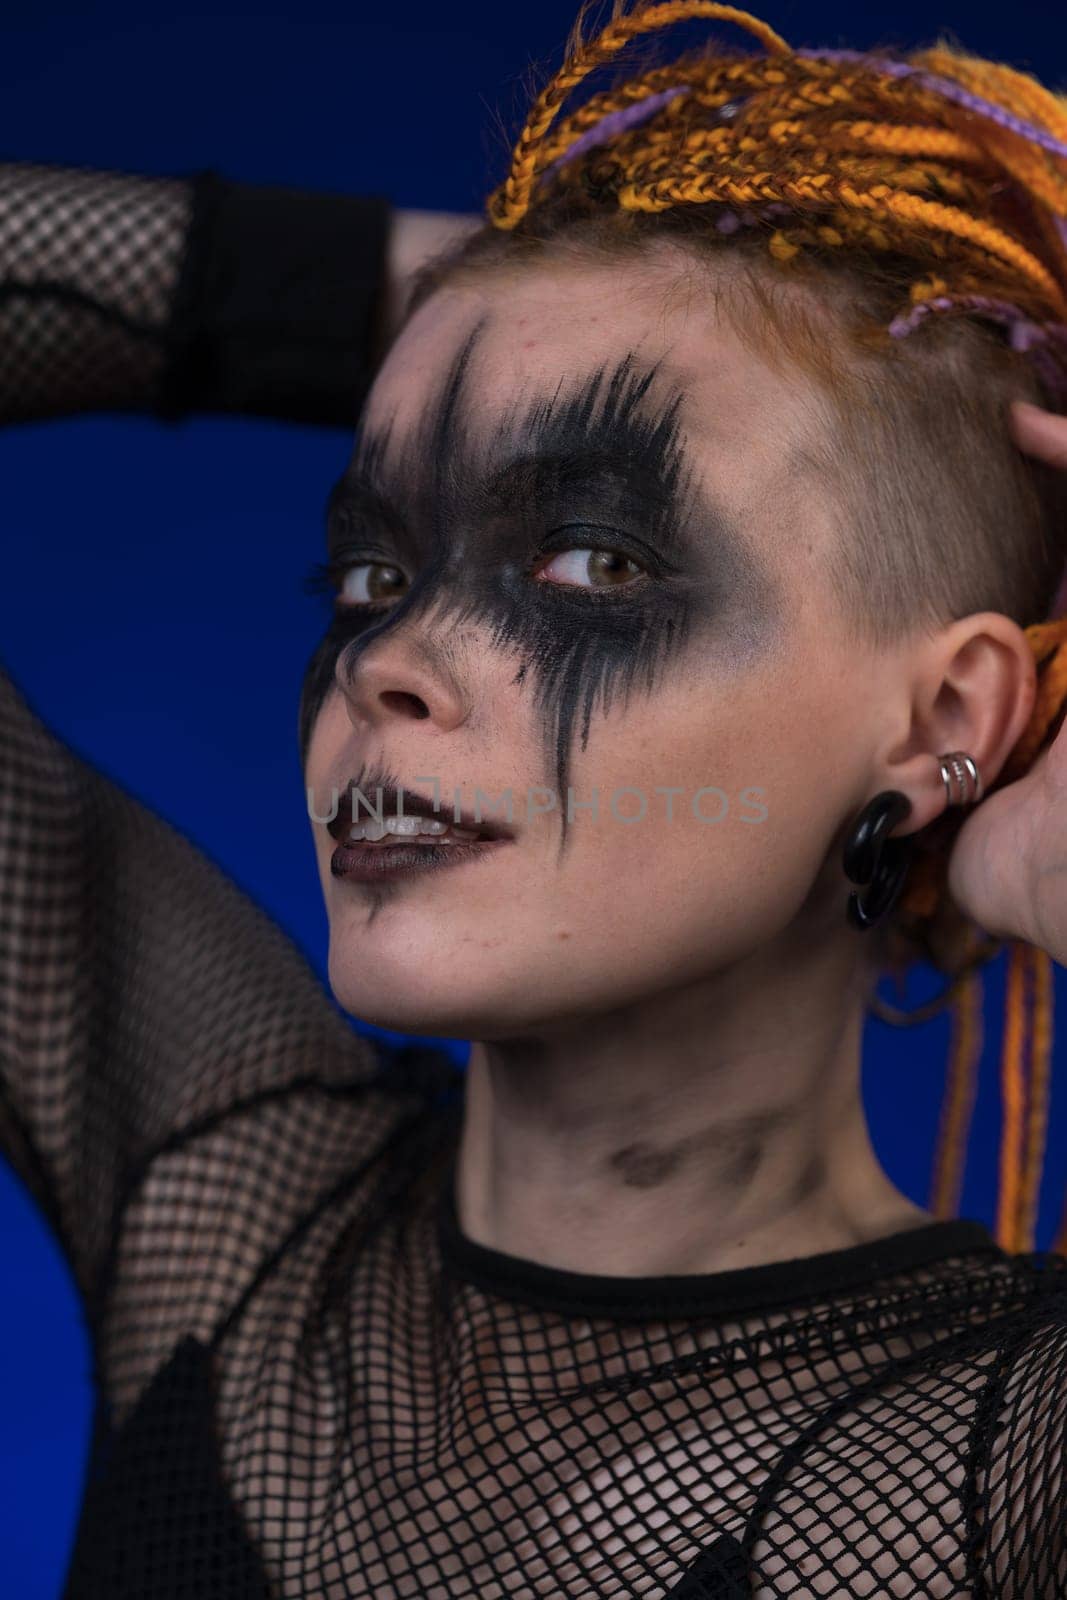 Headshot of young woman with horror black stage make up painted on face and colored without dangerous dreadlocks hairstyle. Studio shot cinematic portrait on blue background. Part of photo series